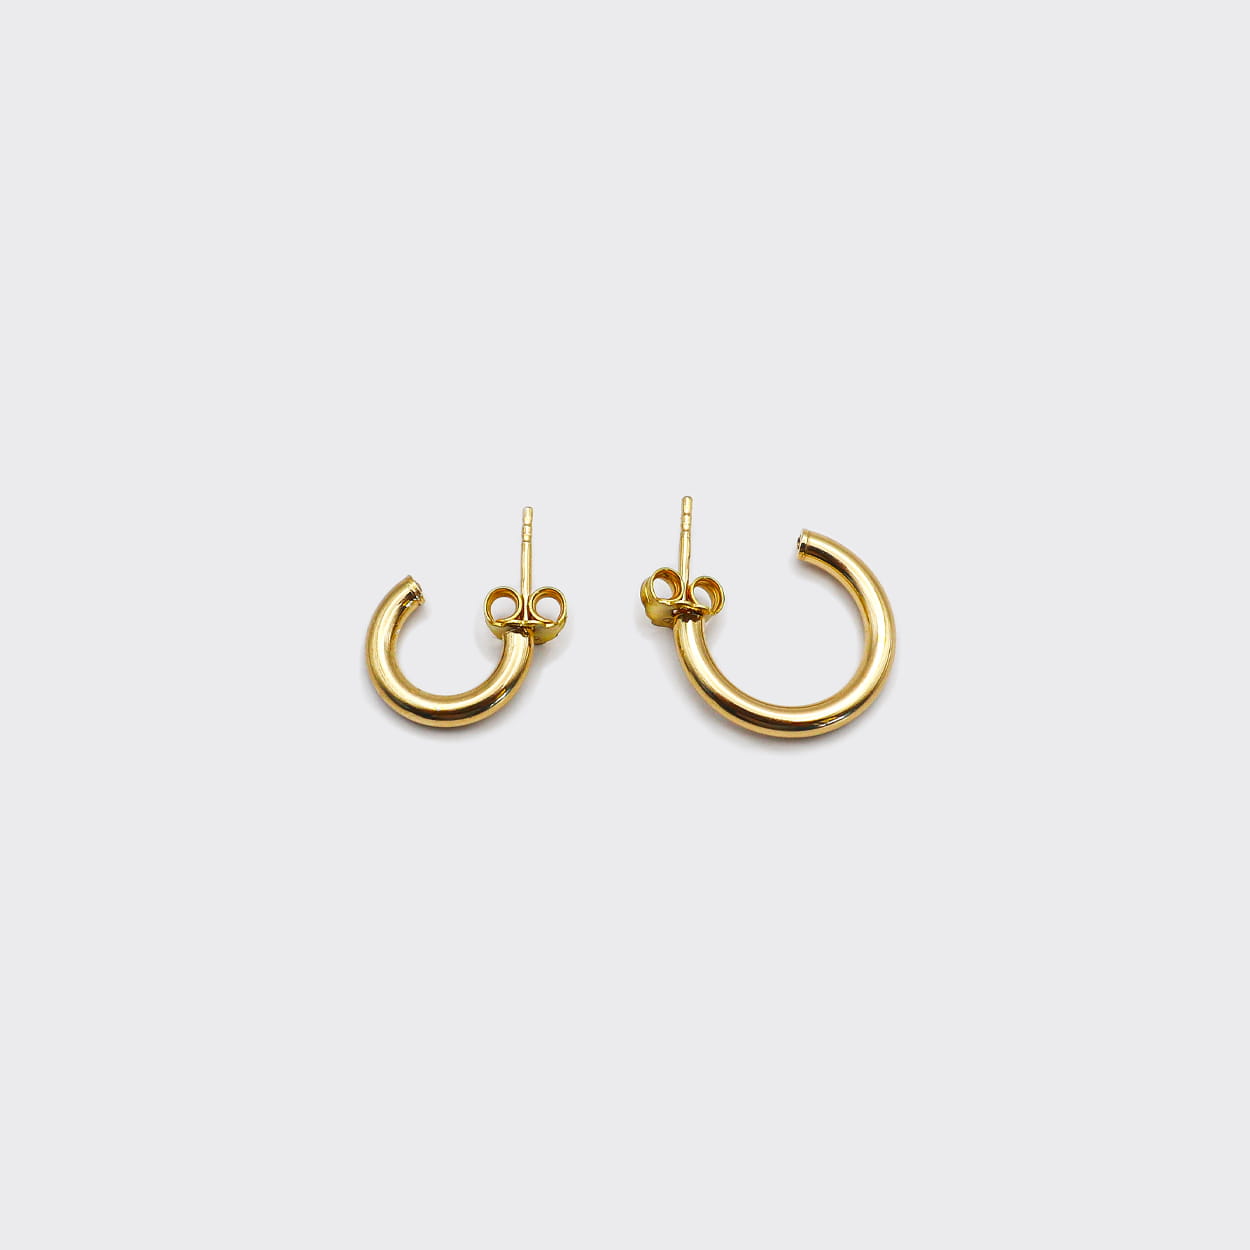 The Hoop 23 is a unisex, timeless and elegant earring designed by Atelier Domingo's. It is crafted in Italy and made of solid 925 Sterling silver with a high-quality 18 karat gold plating. It is a tribute to the famous number 23 of the Chicago Bulls. It is made to be worn every day, by men and women.